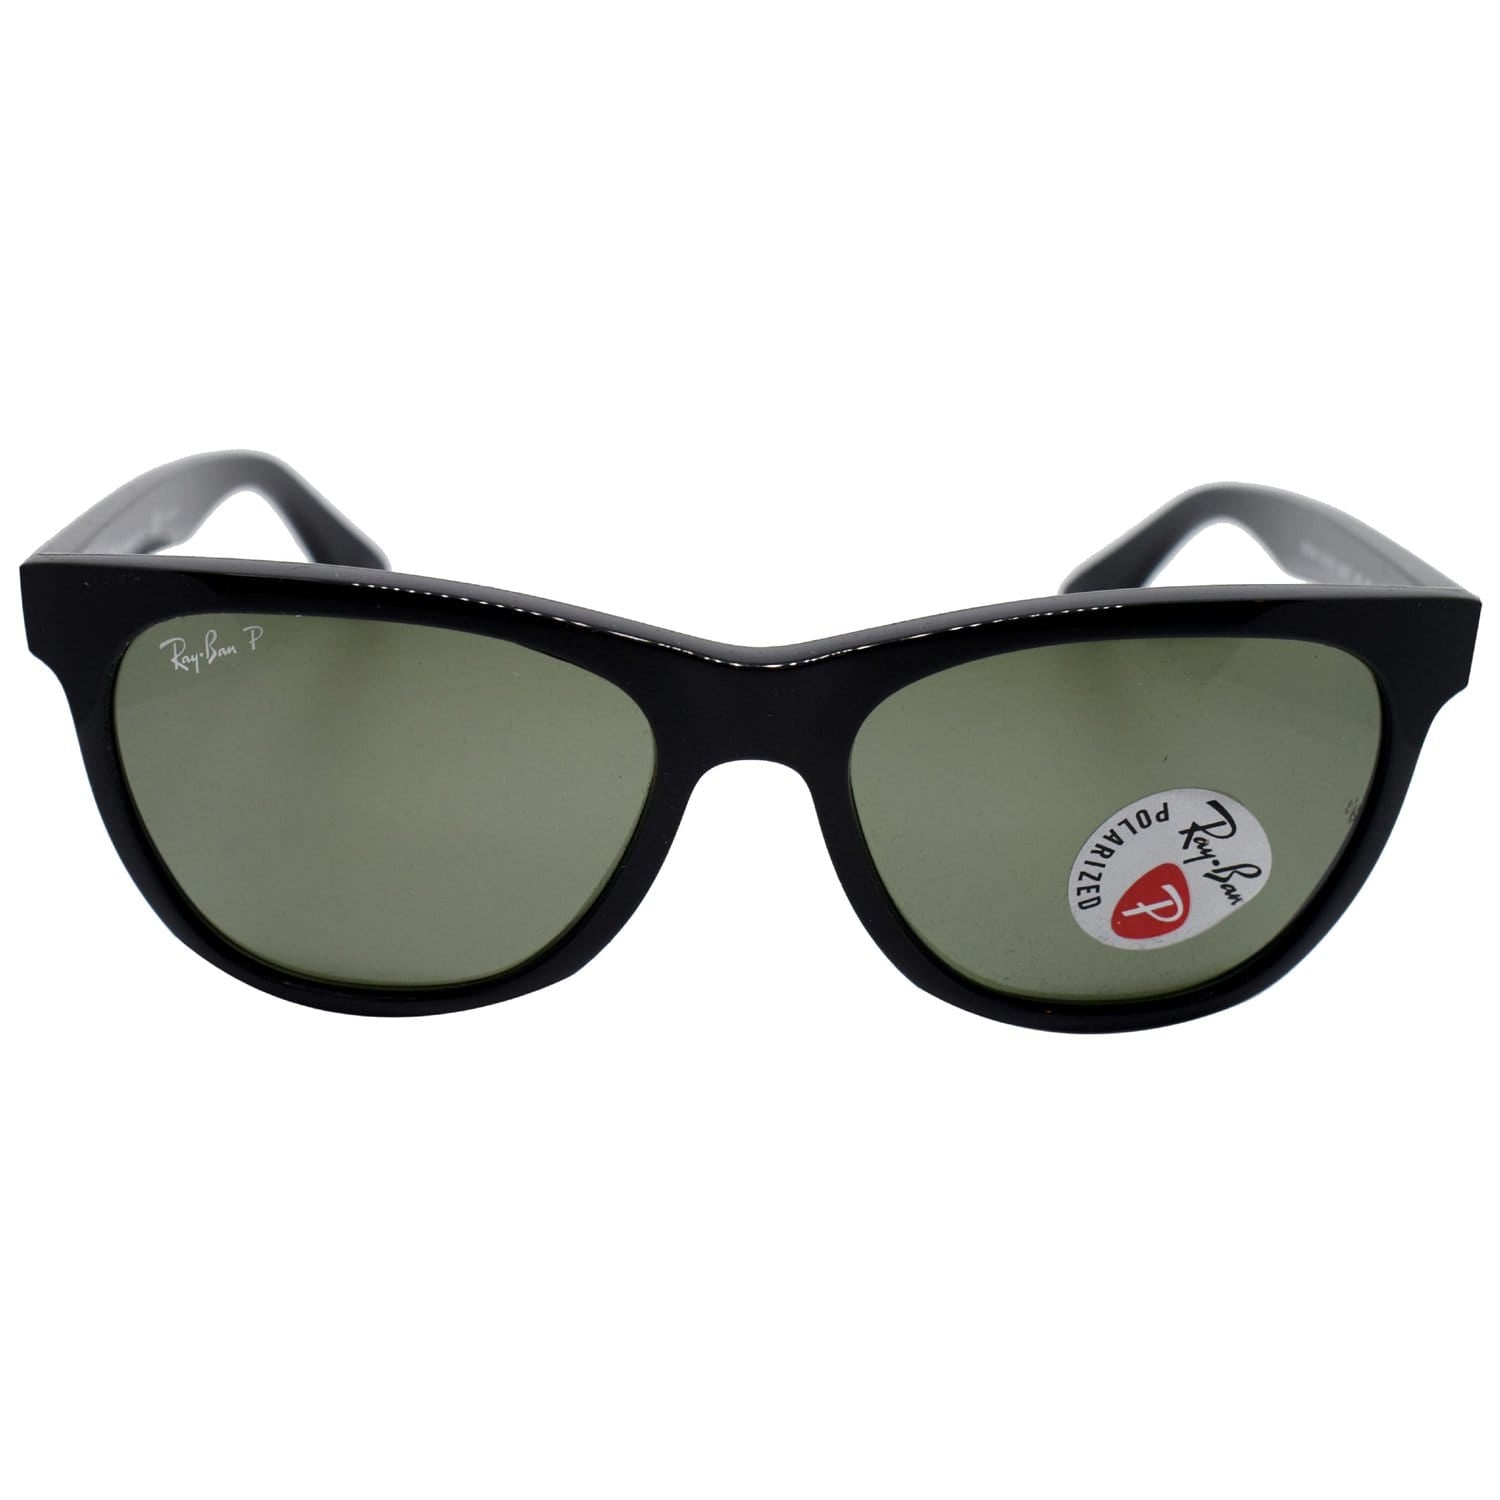 Ray-Ban RB4184 601/9A Sunglasses Green Classic Polarized Lens